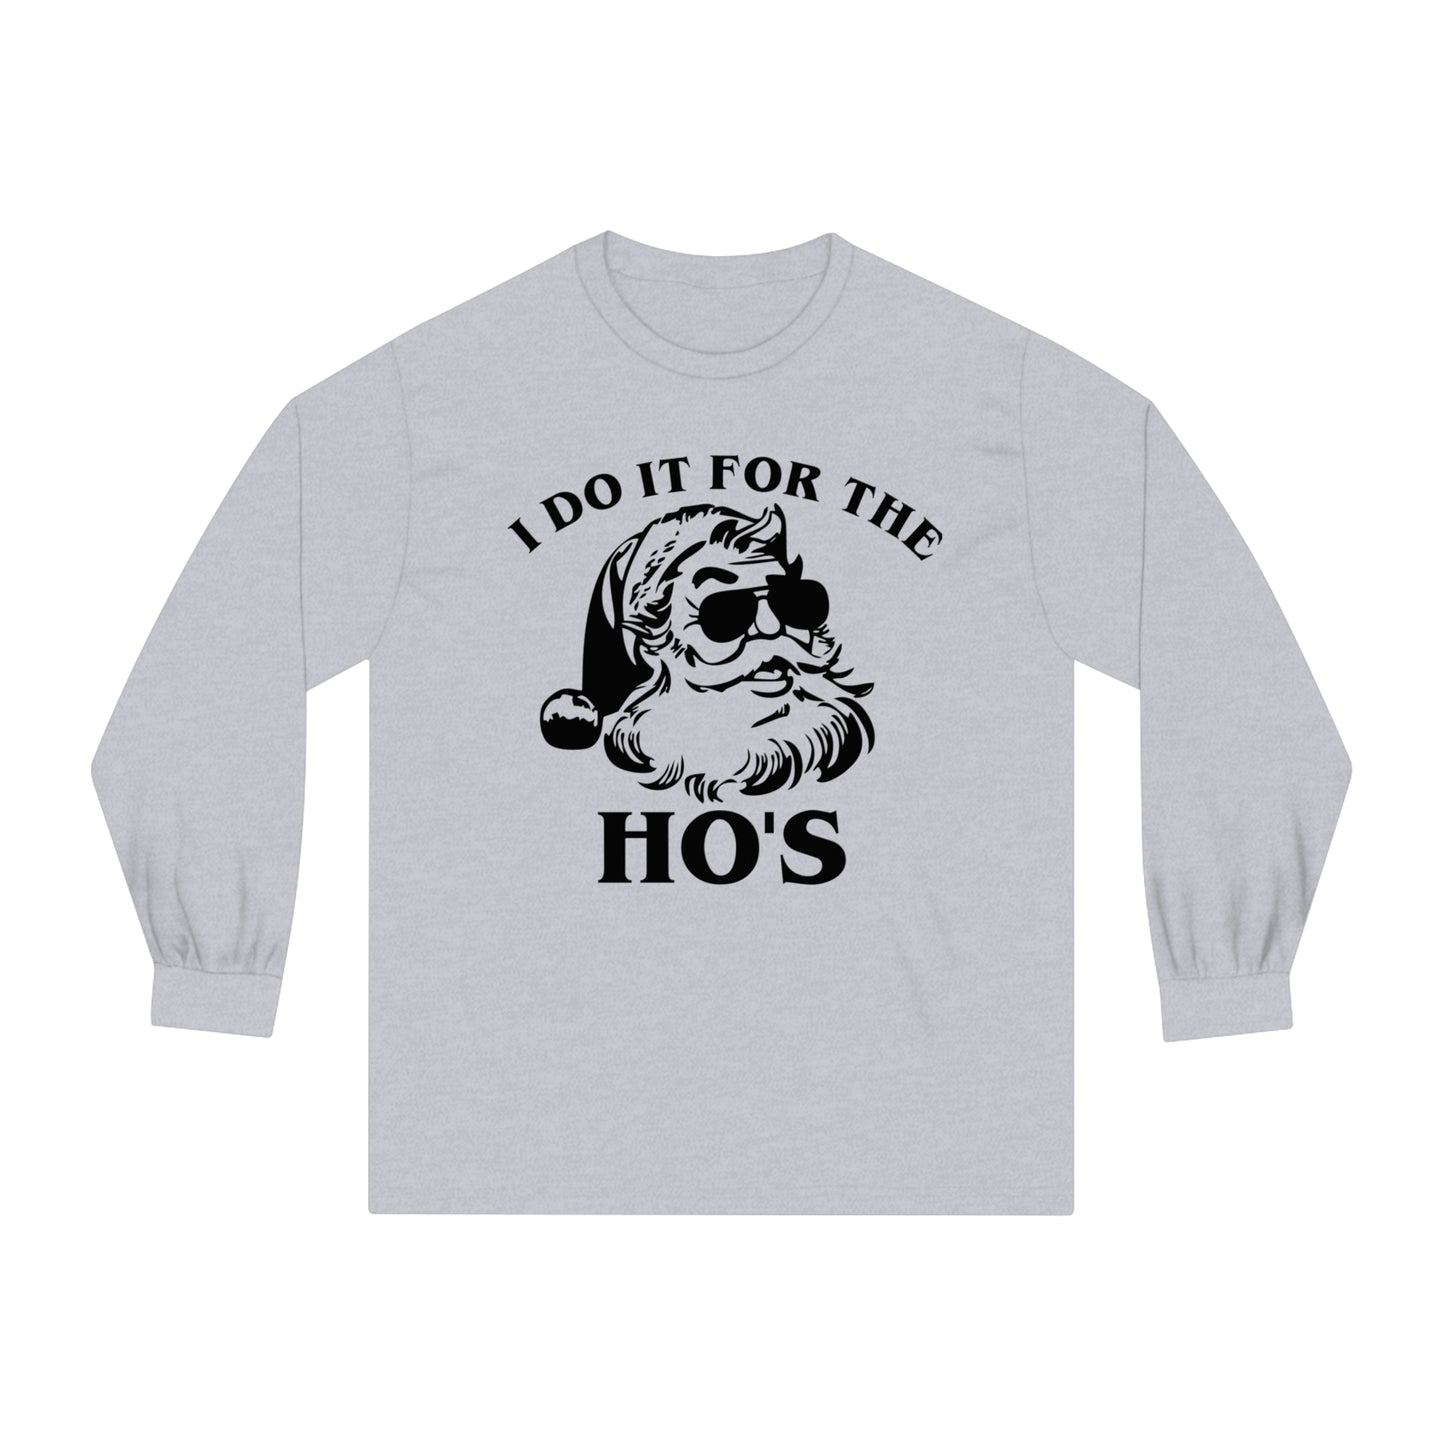 Express Your Hospitality With 'I Do It For The Host' T-Shirt